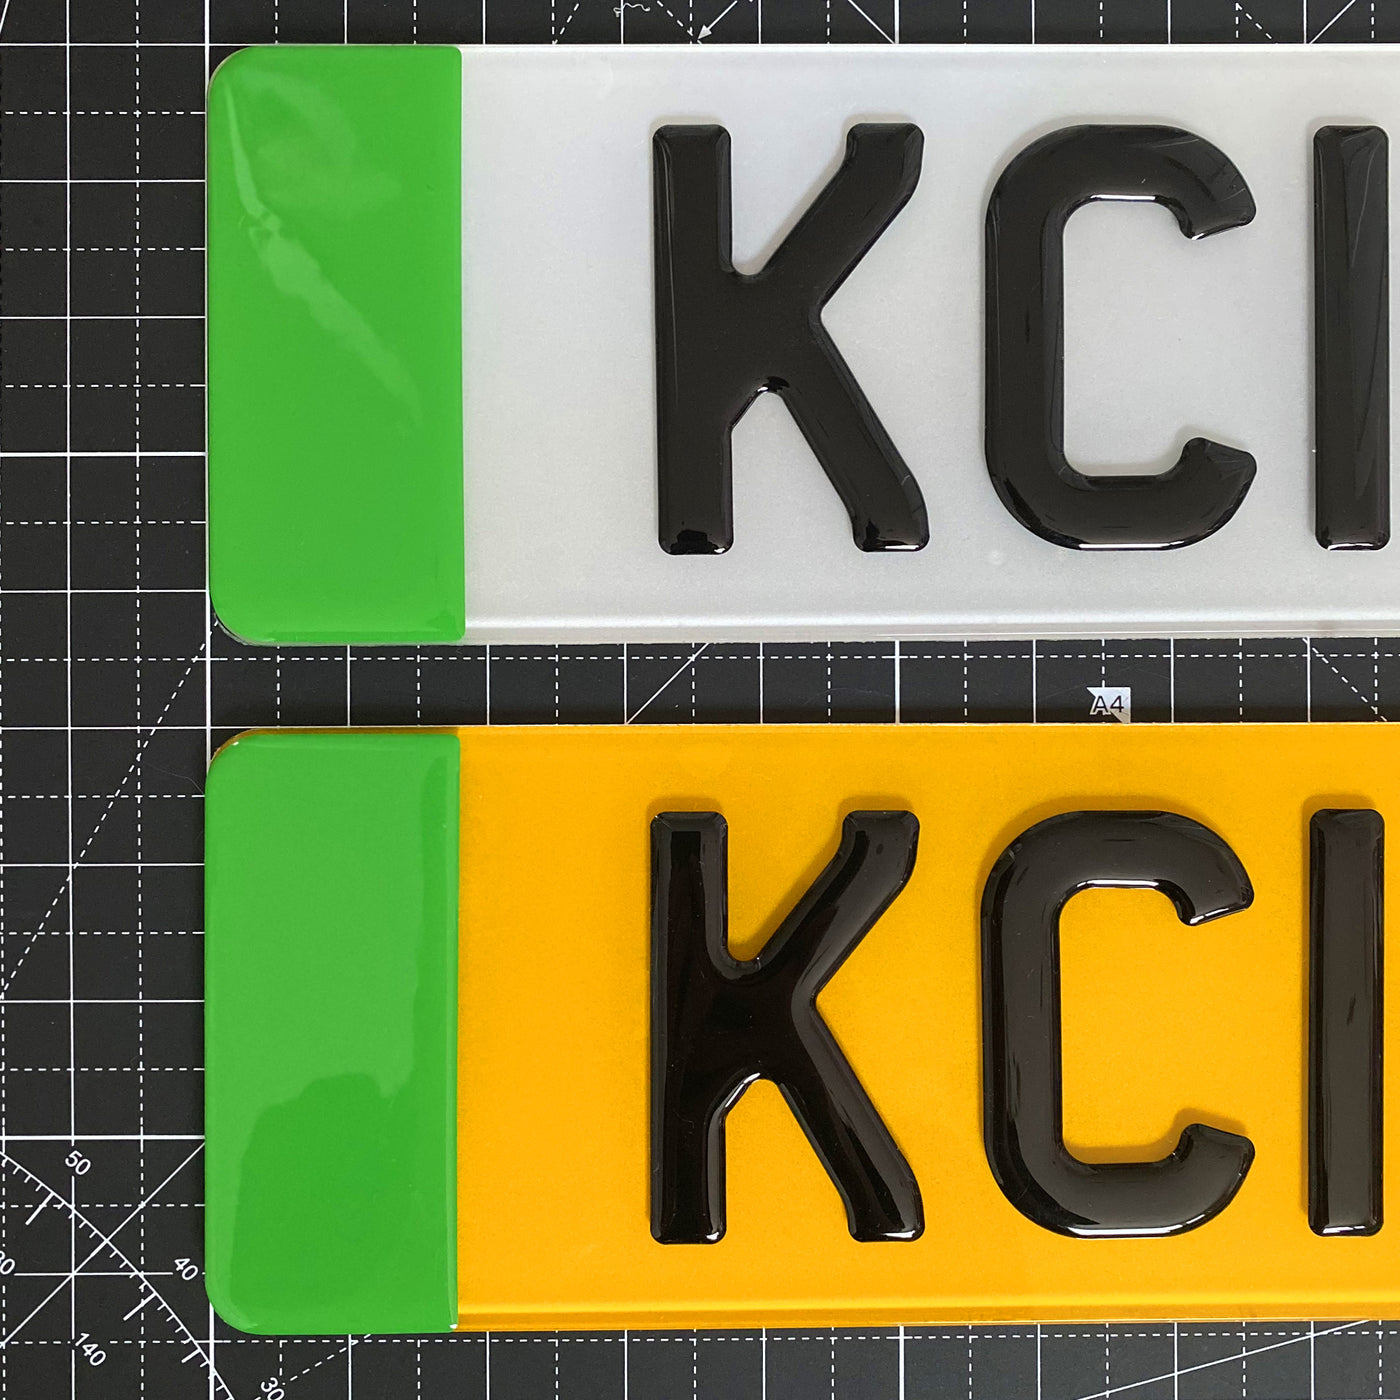 Electric car number plates